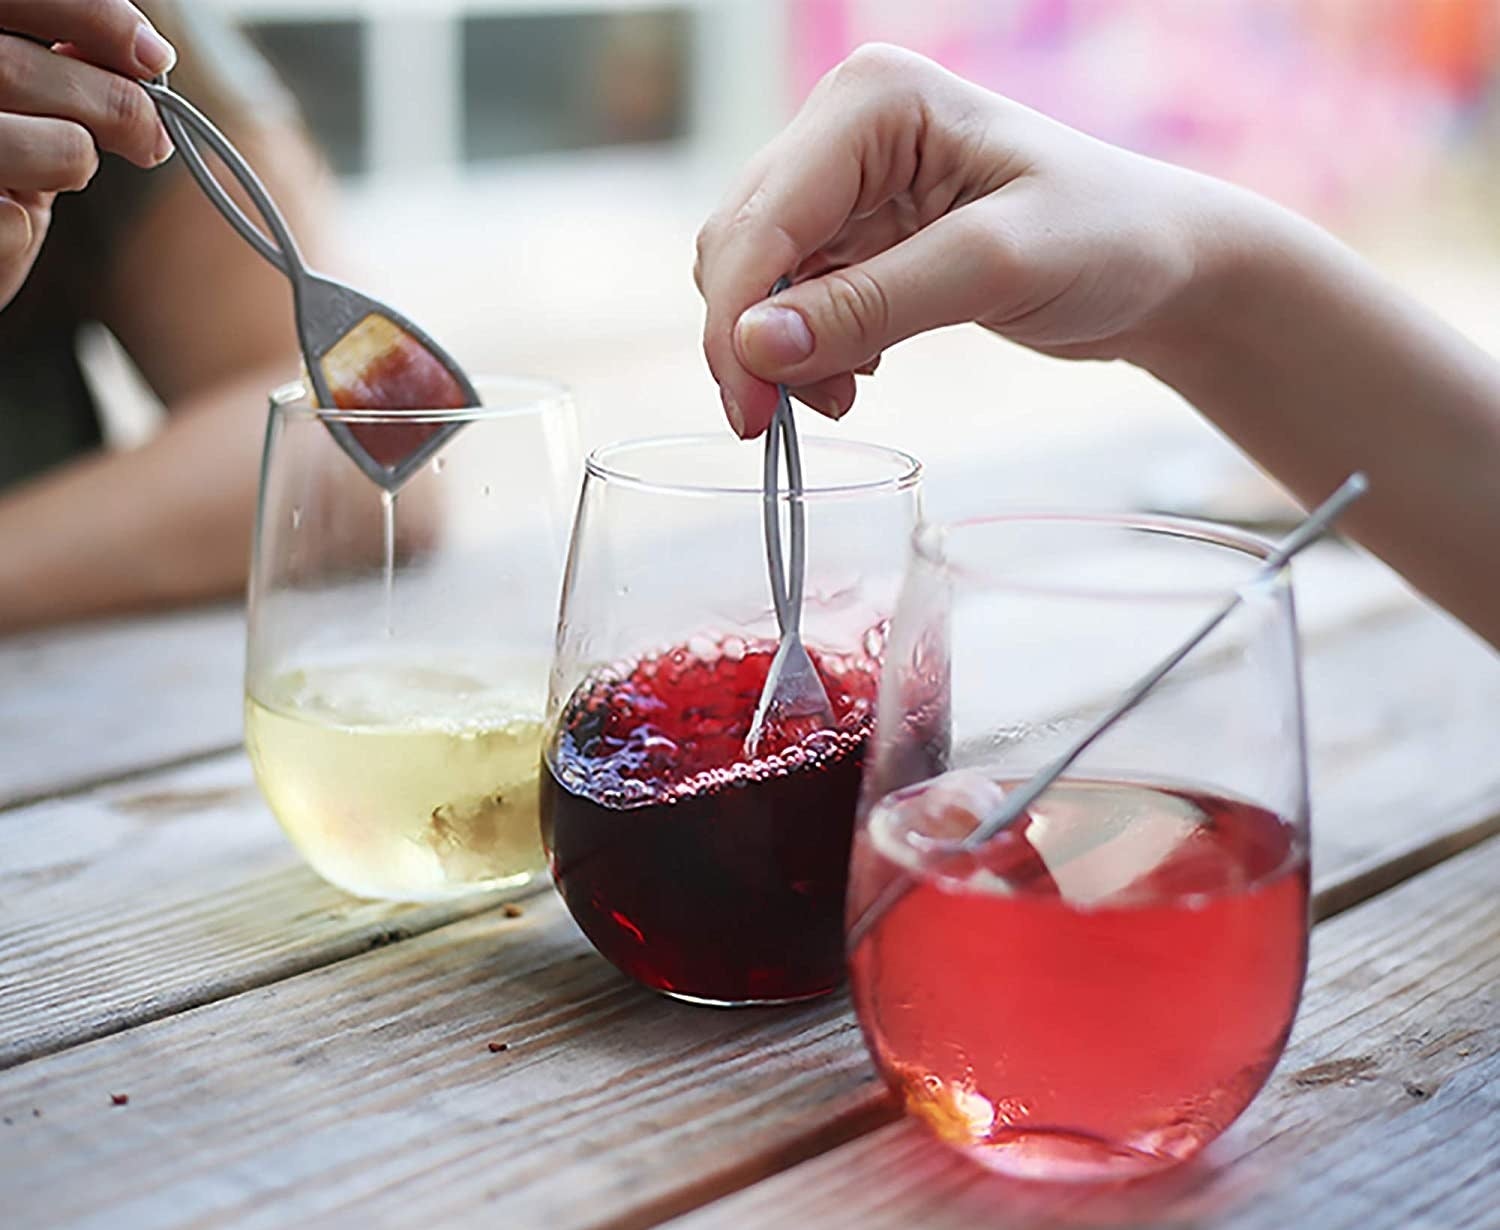 Two people stirring glasses of wine with wine filter wands